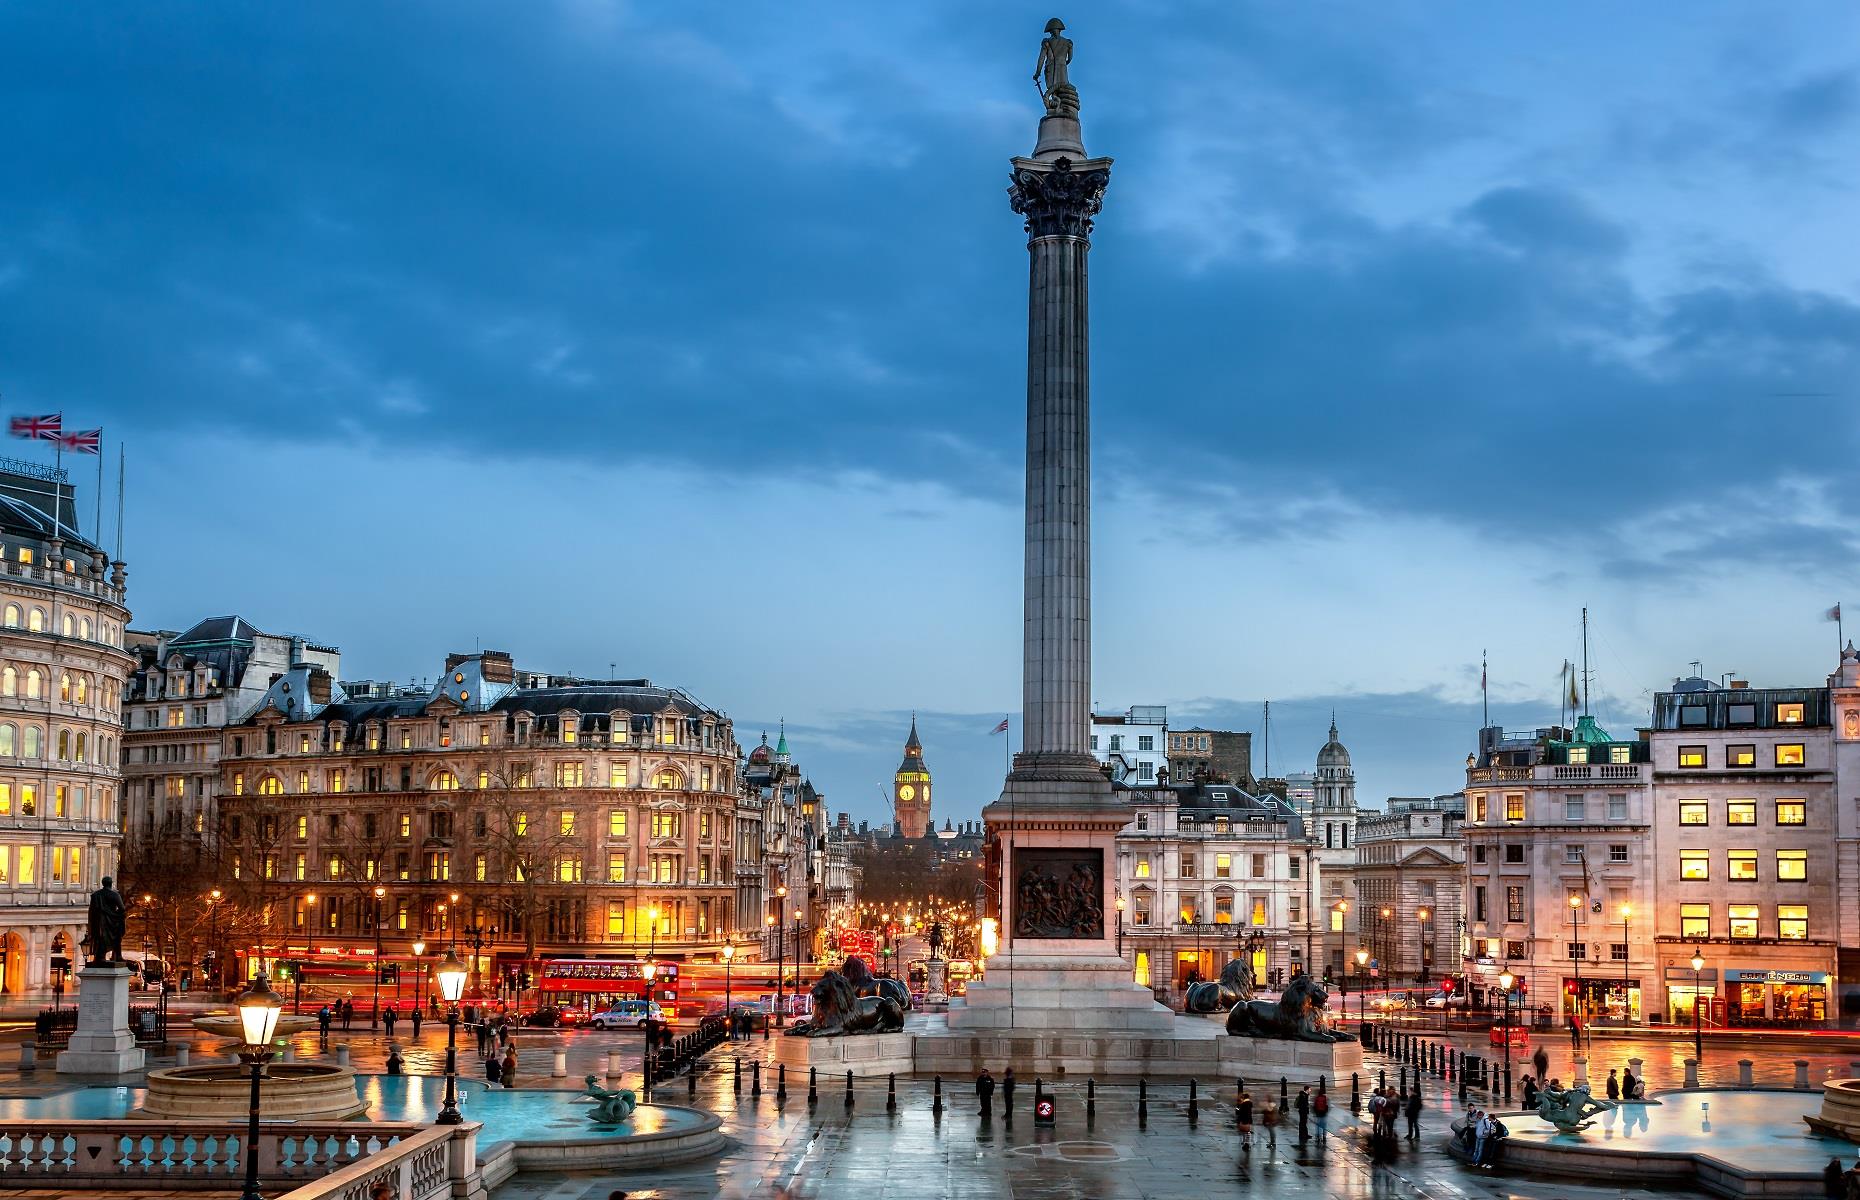 <p>Europe’s number one movie location is London's iconic Trafalgar Square. With 131 film credits, this world-renowned destination attracts millions of visitors every single year. Home to a lion-adorned fountain, Nelson's Column and the National Portrait Gallery, this spot is quintessentially London. From <em>28 Weeks Later</em> to <em>Wonder Woman</em>, <em>V for Vendetta</em> and <em>Skyfall</em>, Trafalgar Square remains one of the world's most recognizable places.</p>  <p><a href="https://www.loveexploring.com/galleries/94887/can-you-guess-these-uk-landmarks-from-their-closeups?page=1"><strong>Can you guess these UK landmarks from their close-ups?</strong></a></p>